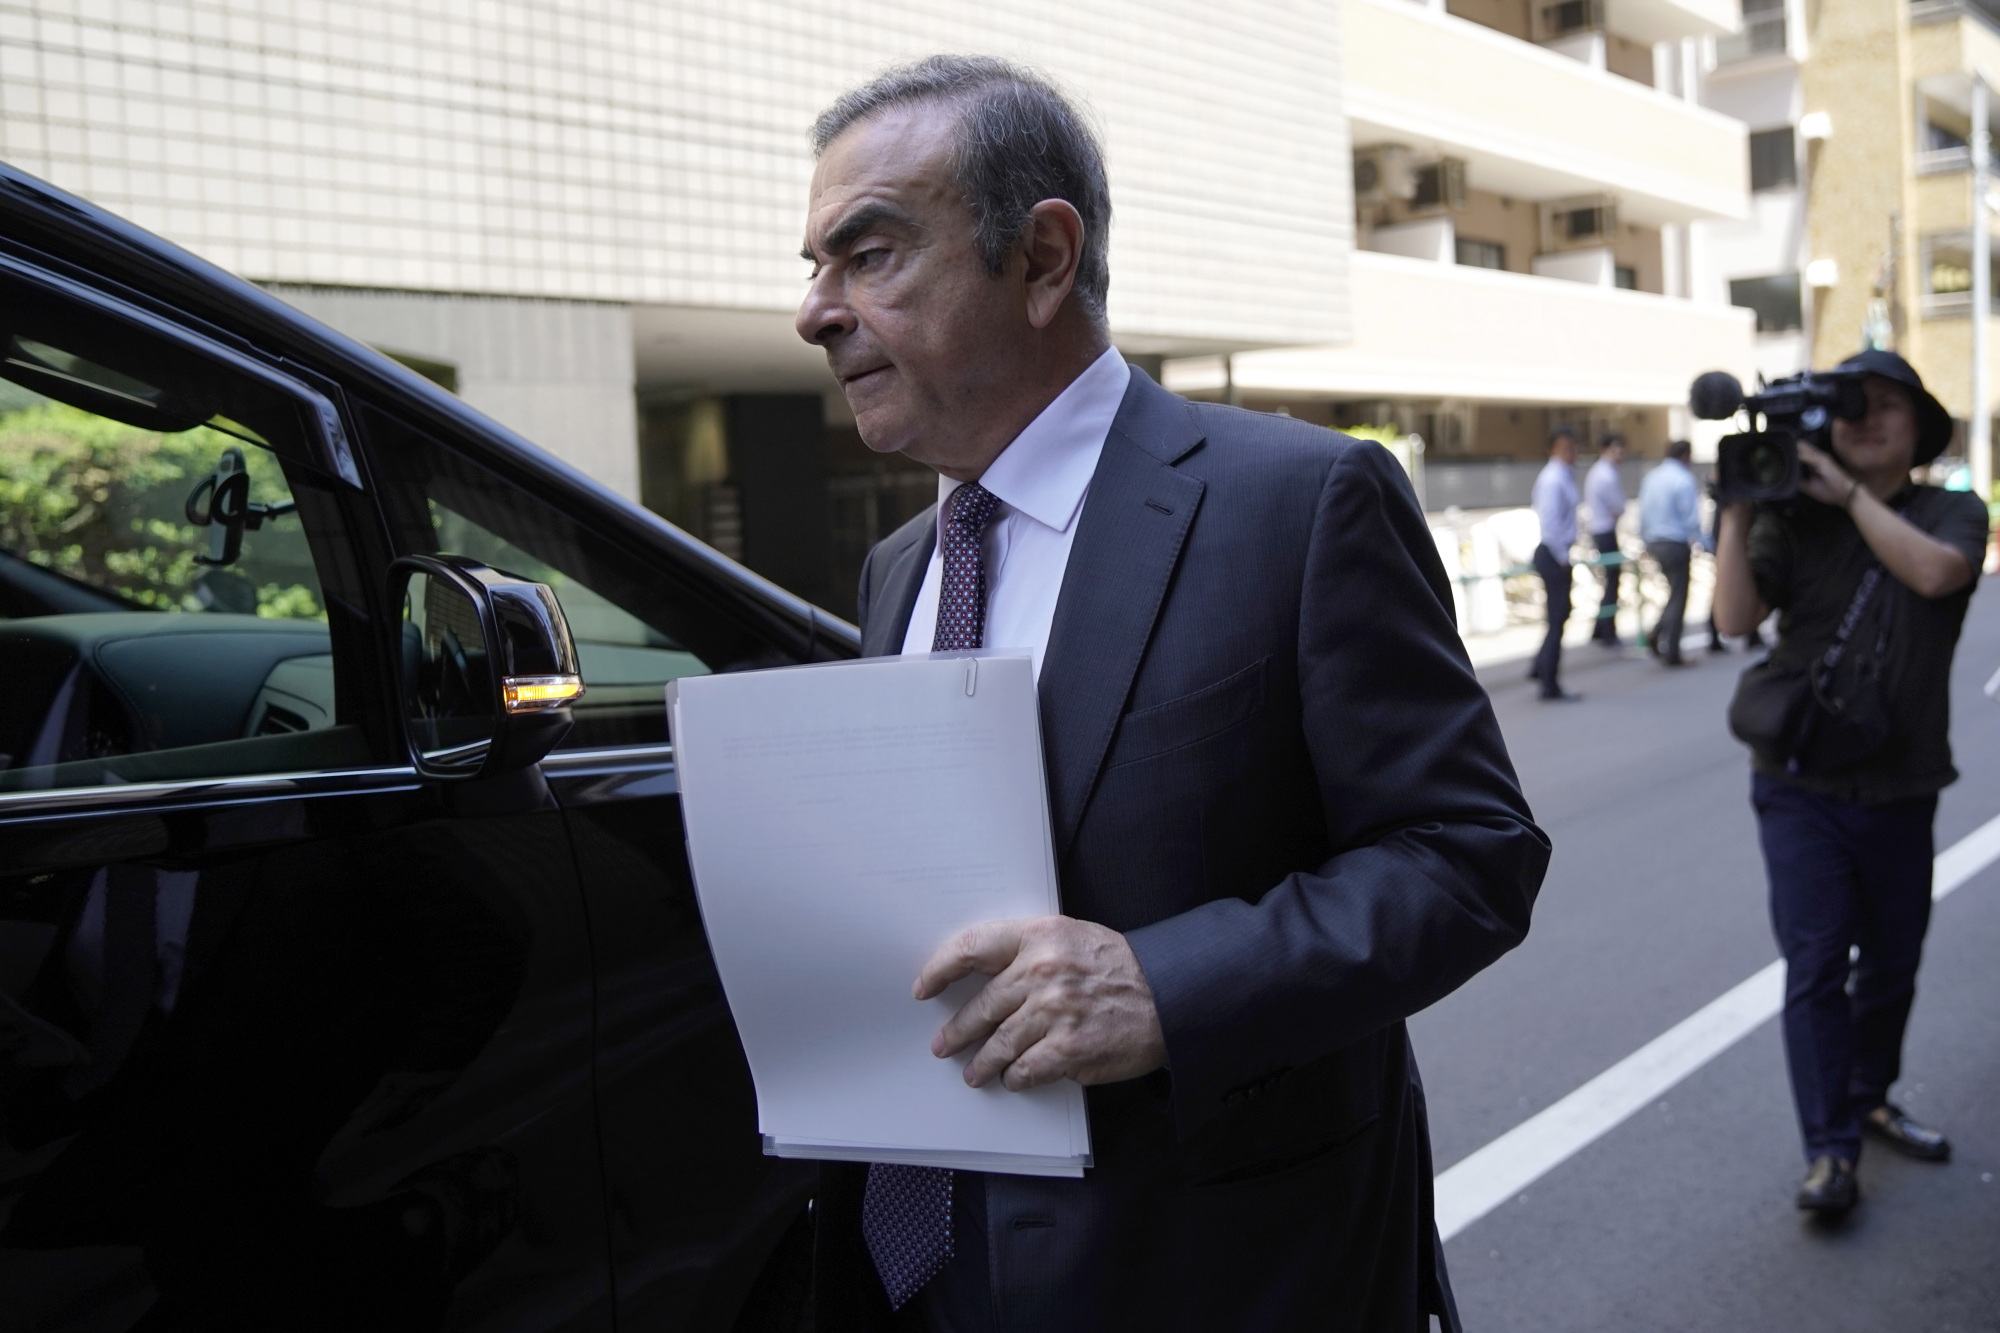 Carlos Ghosn, former chairman of Nissan Motor Co., walks toward a vehicle as he leaves his lawyer's office in Tokyo in May. | BLOOMBERG